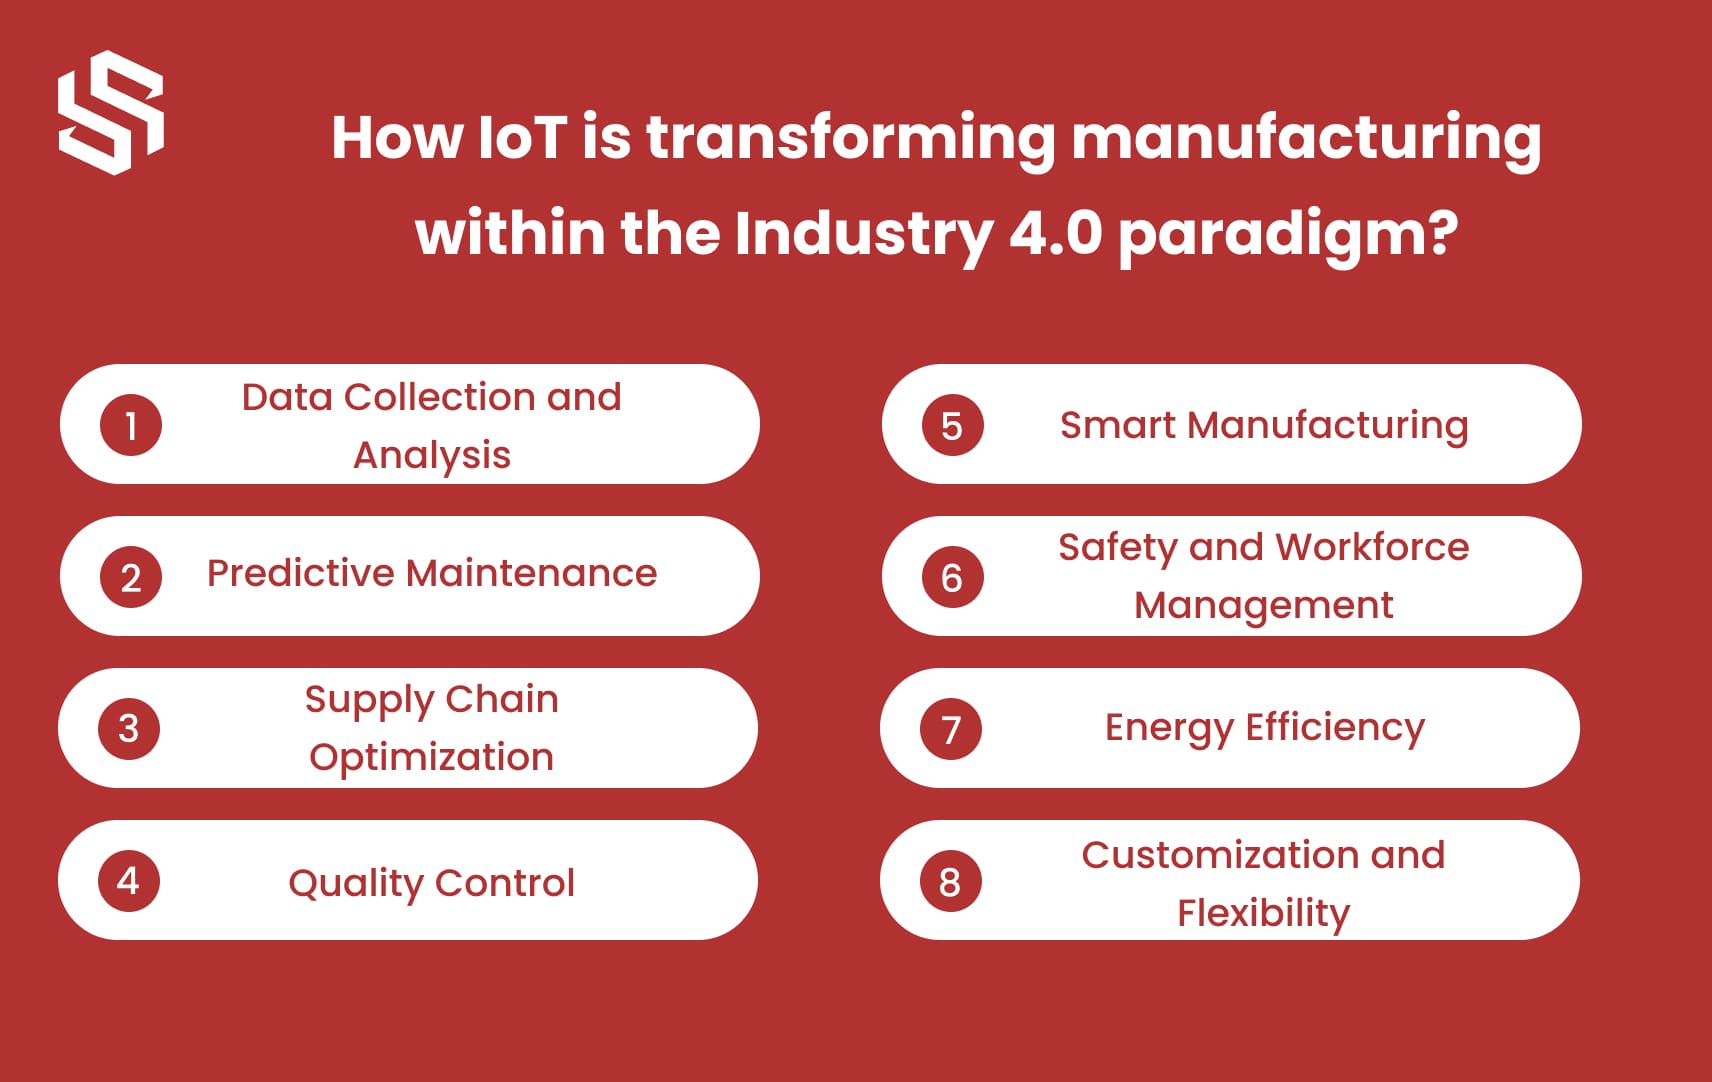 How IoT is transforming manufacturing within the Industry 4.0 paradigm